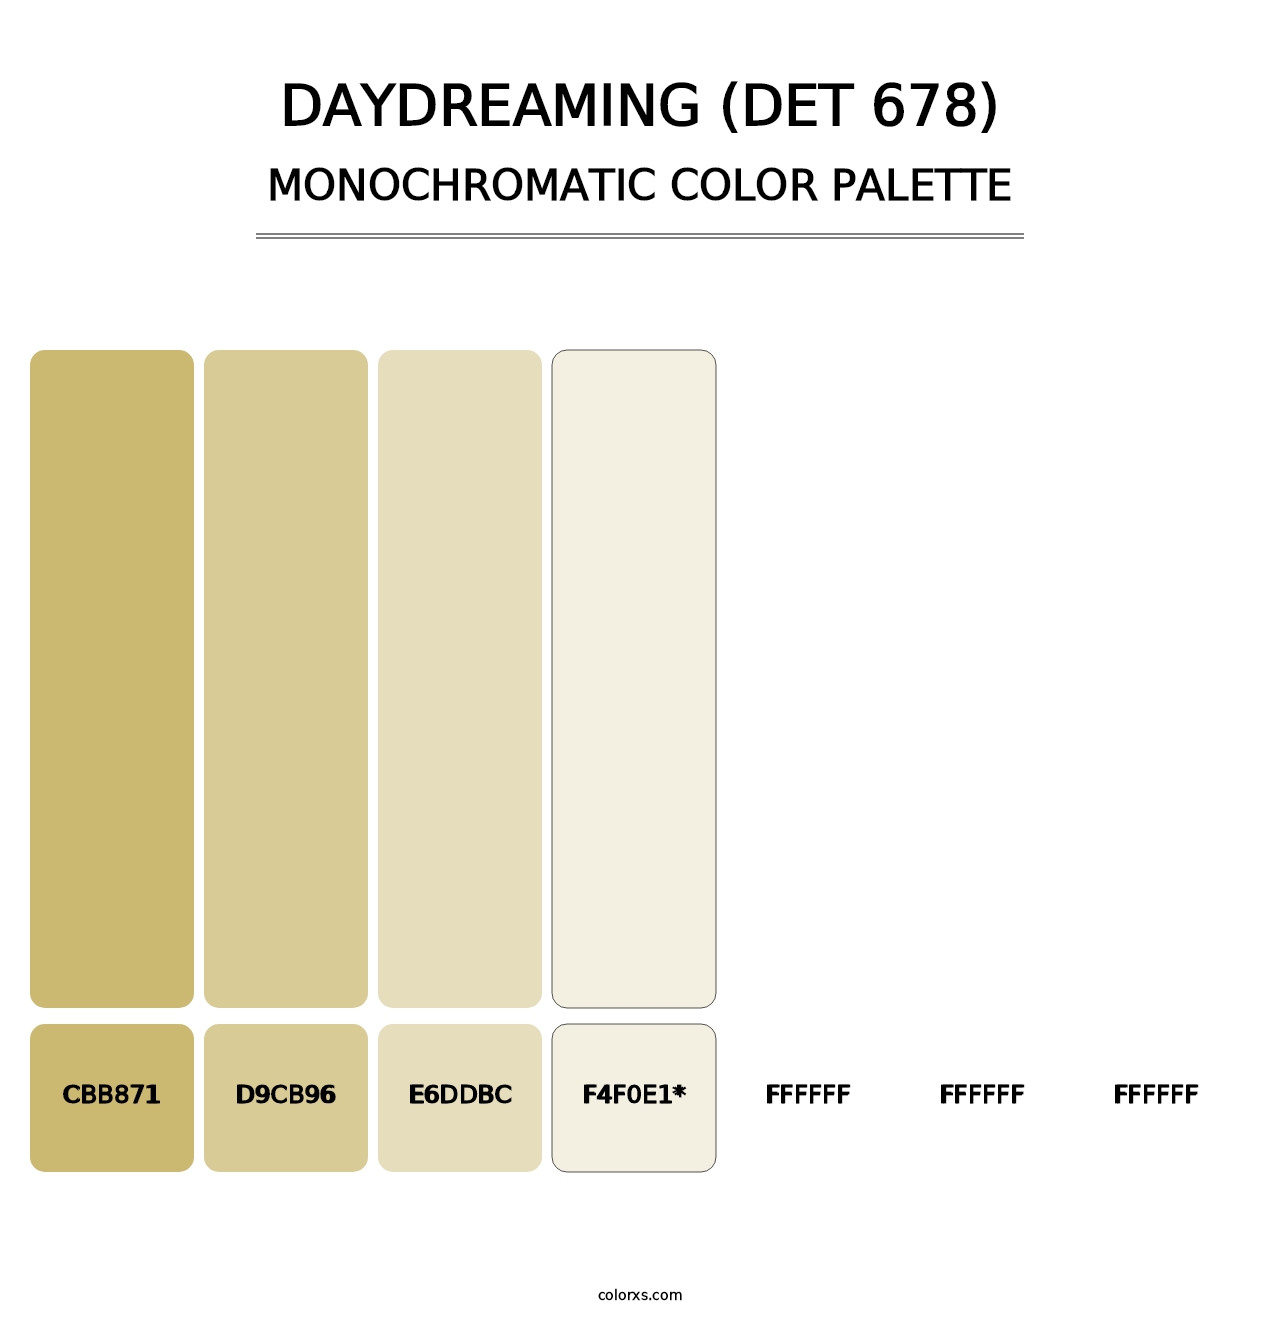 Daydreaming (DET 678) - Monochromatic Color Palette